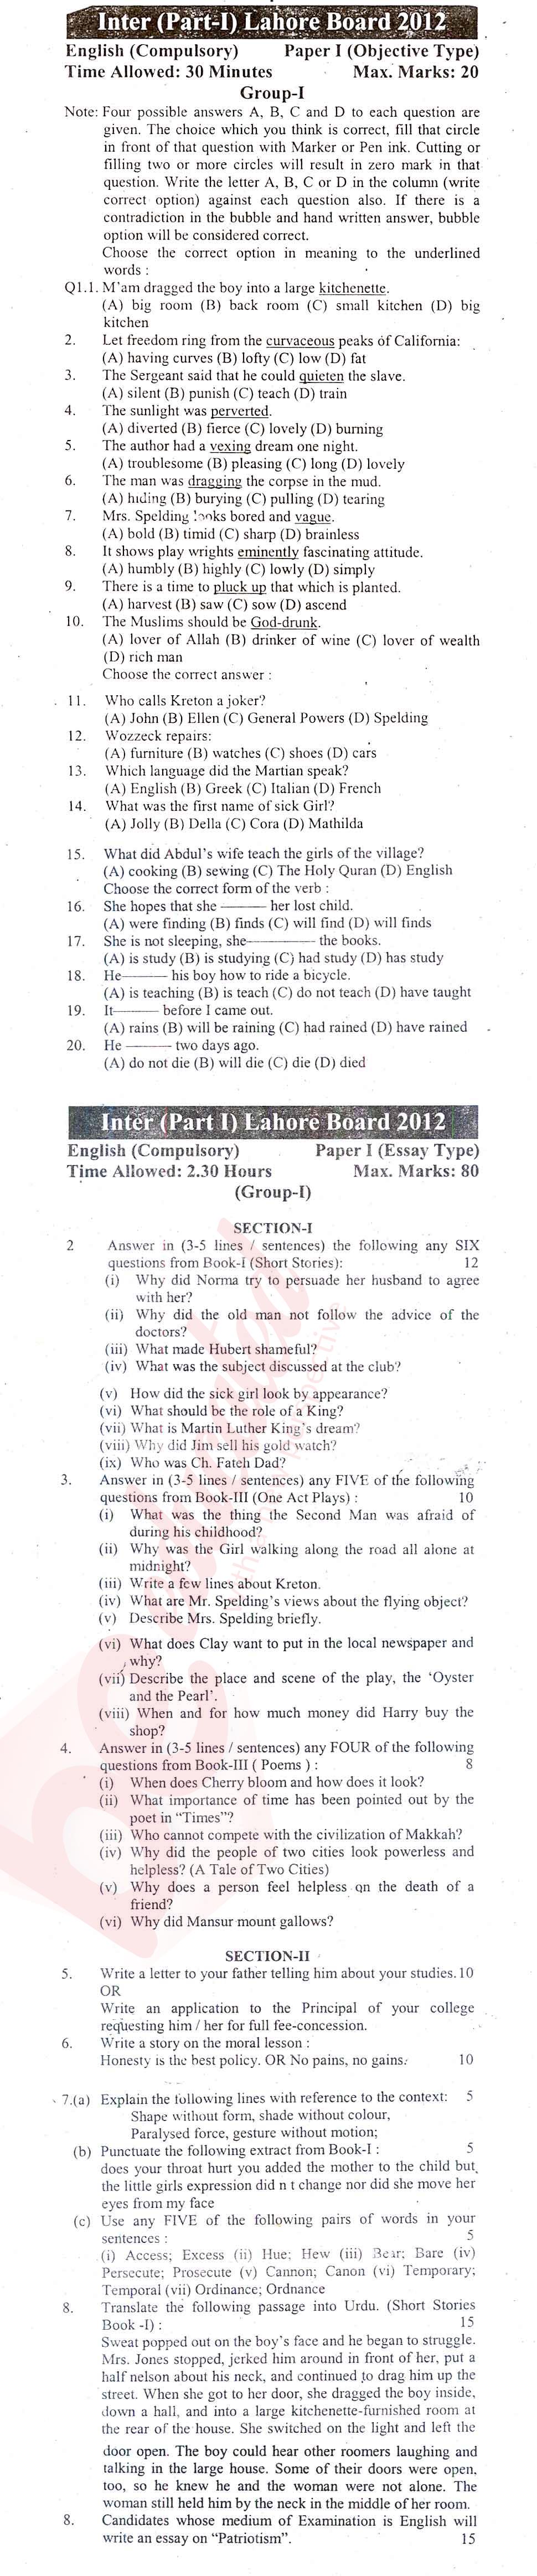 English 11th class Past Paper Group 1 BISE Lahore 2012